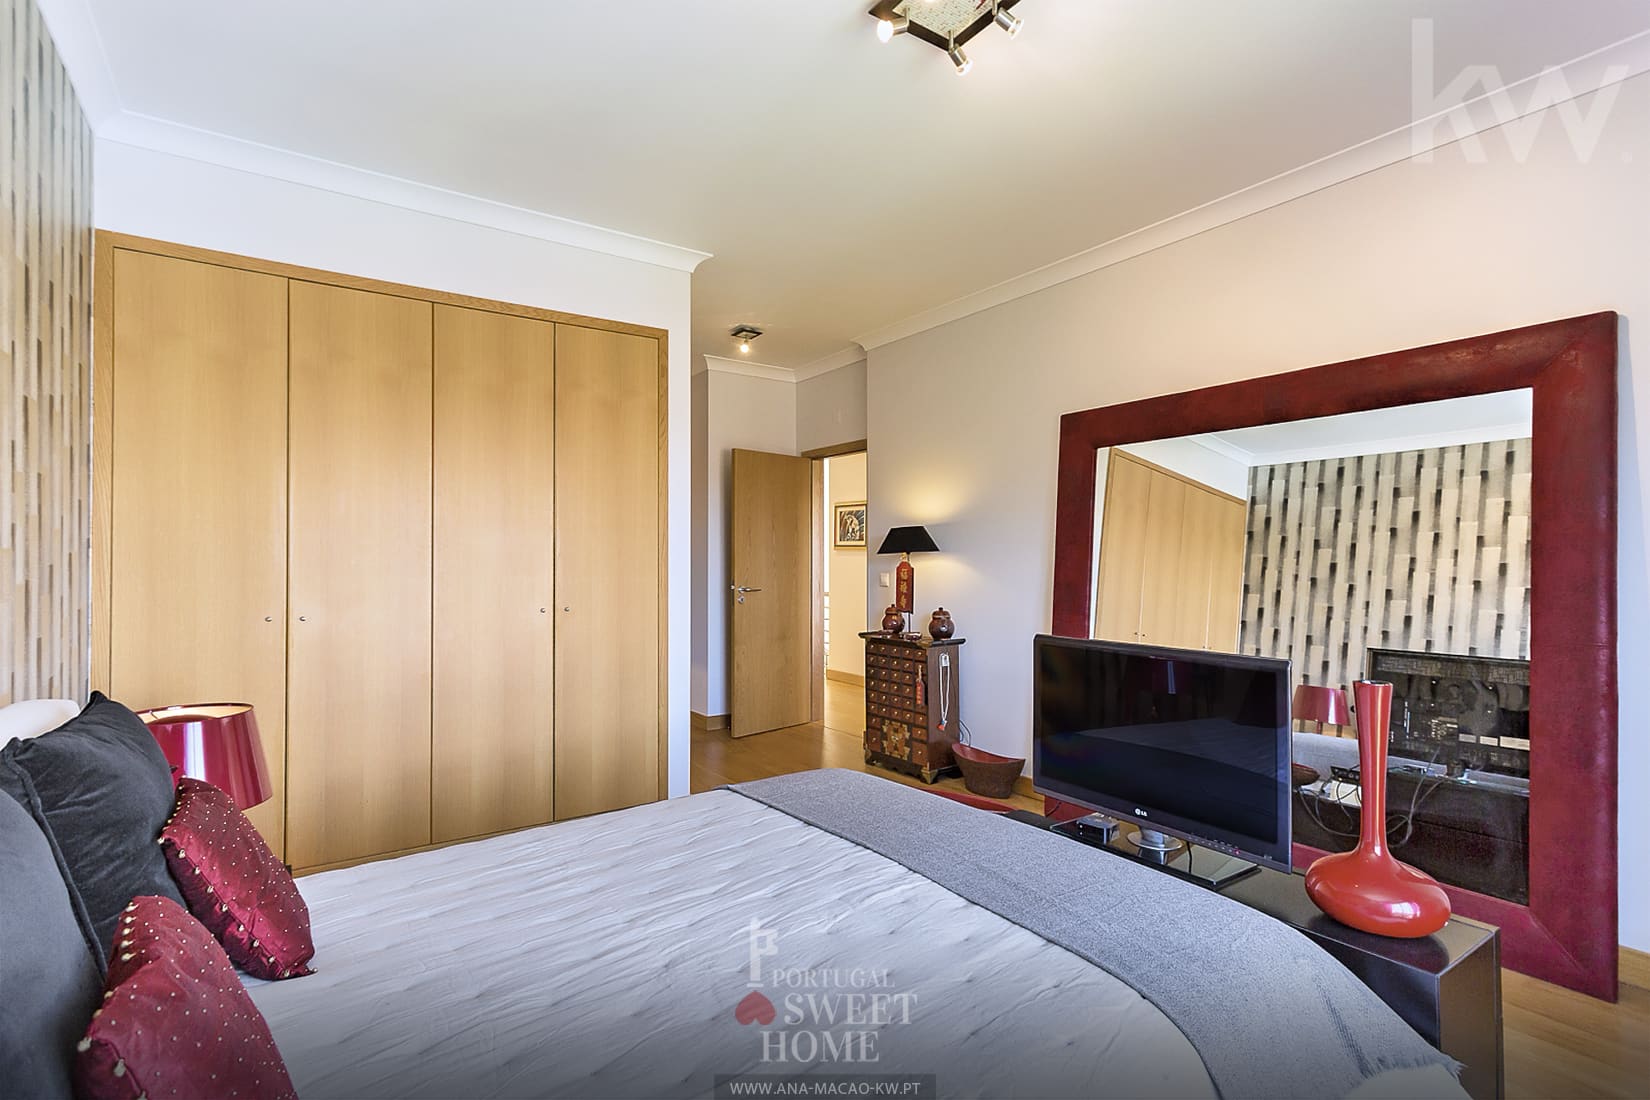 Main suite (22.7 m²), spacious and bright